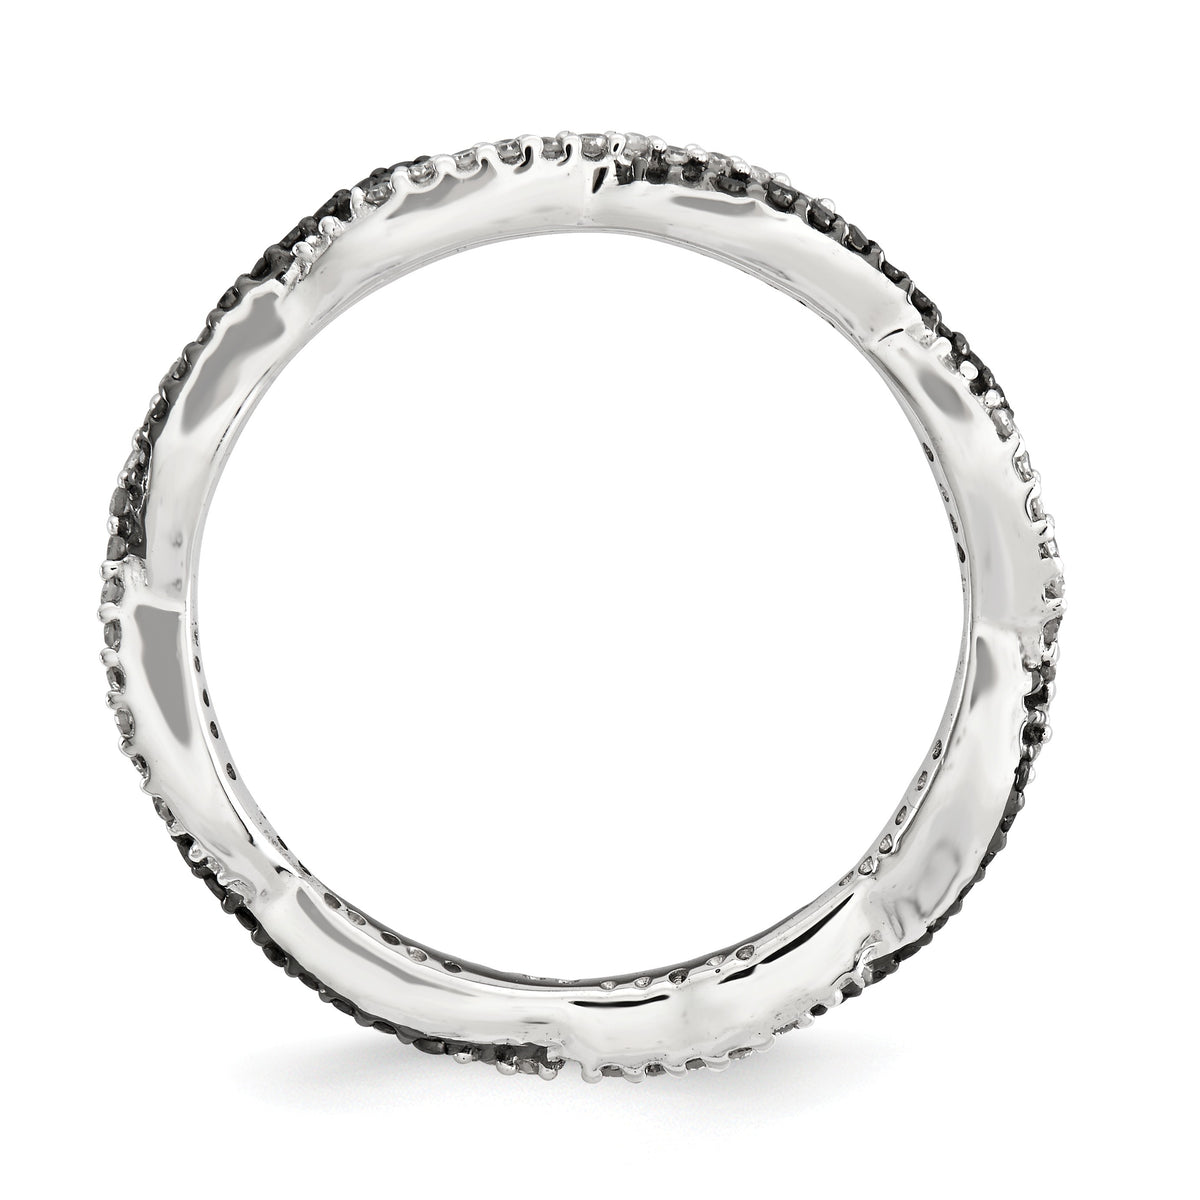 Alternate view of the Stackable Two-tone 1/4 Ctw HI/I3 Diamond Rhodium Plated Silver Band by The Black Bow Jewelry Co.